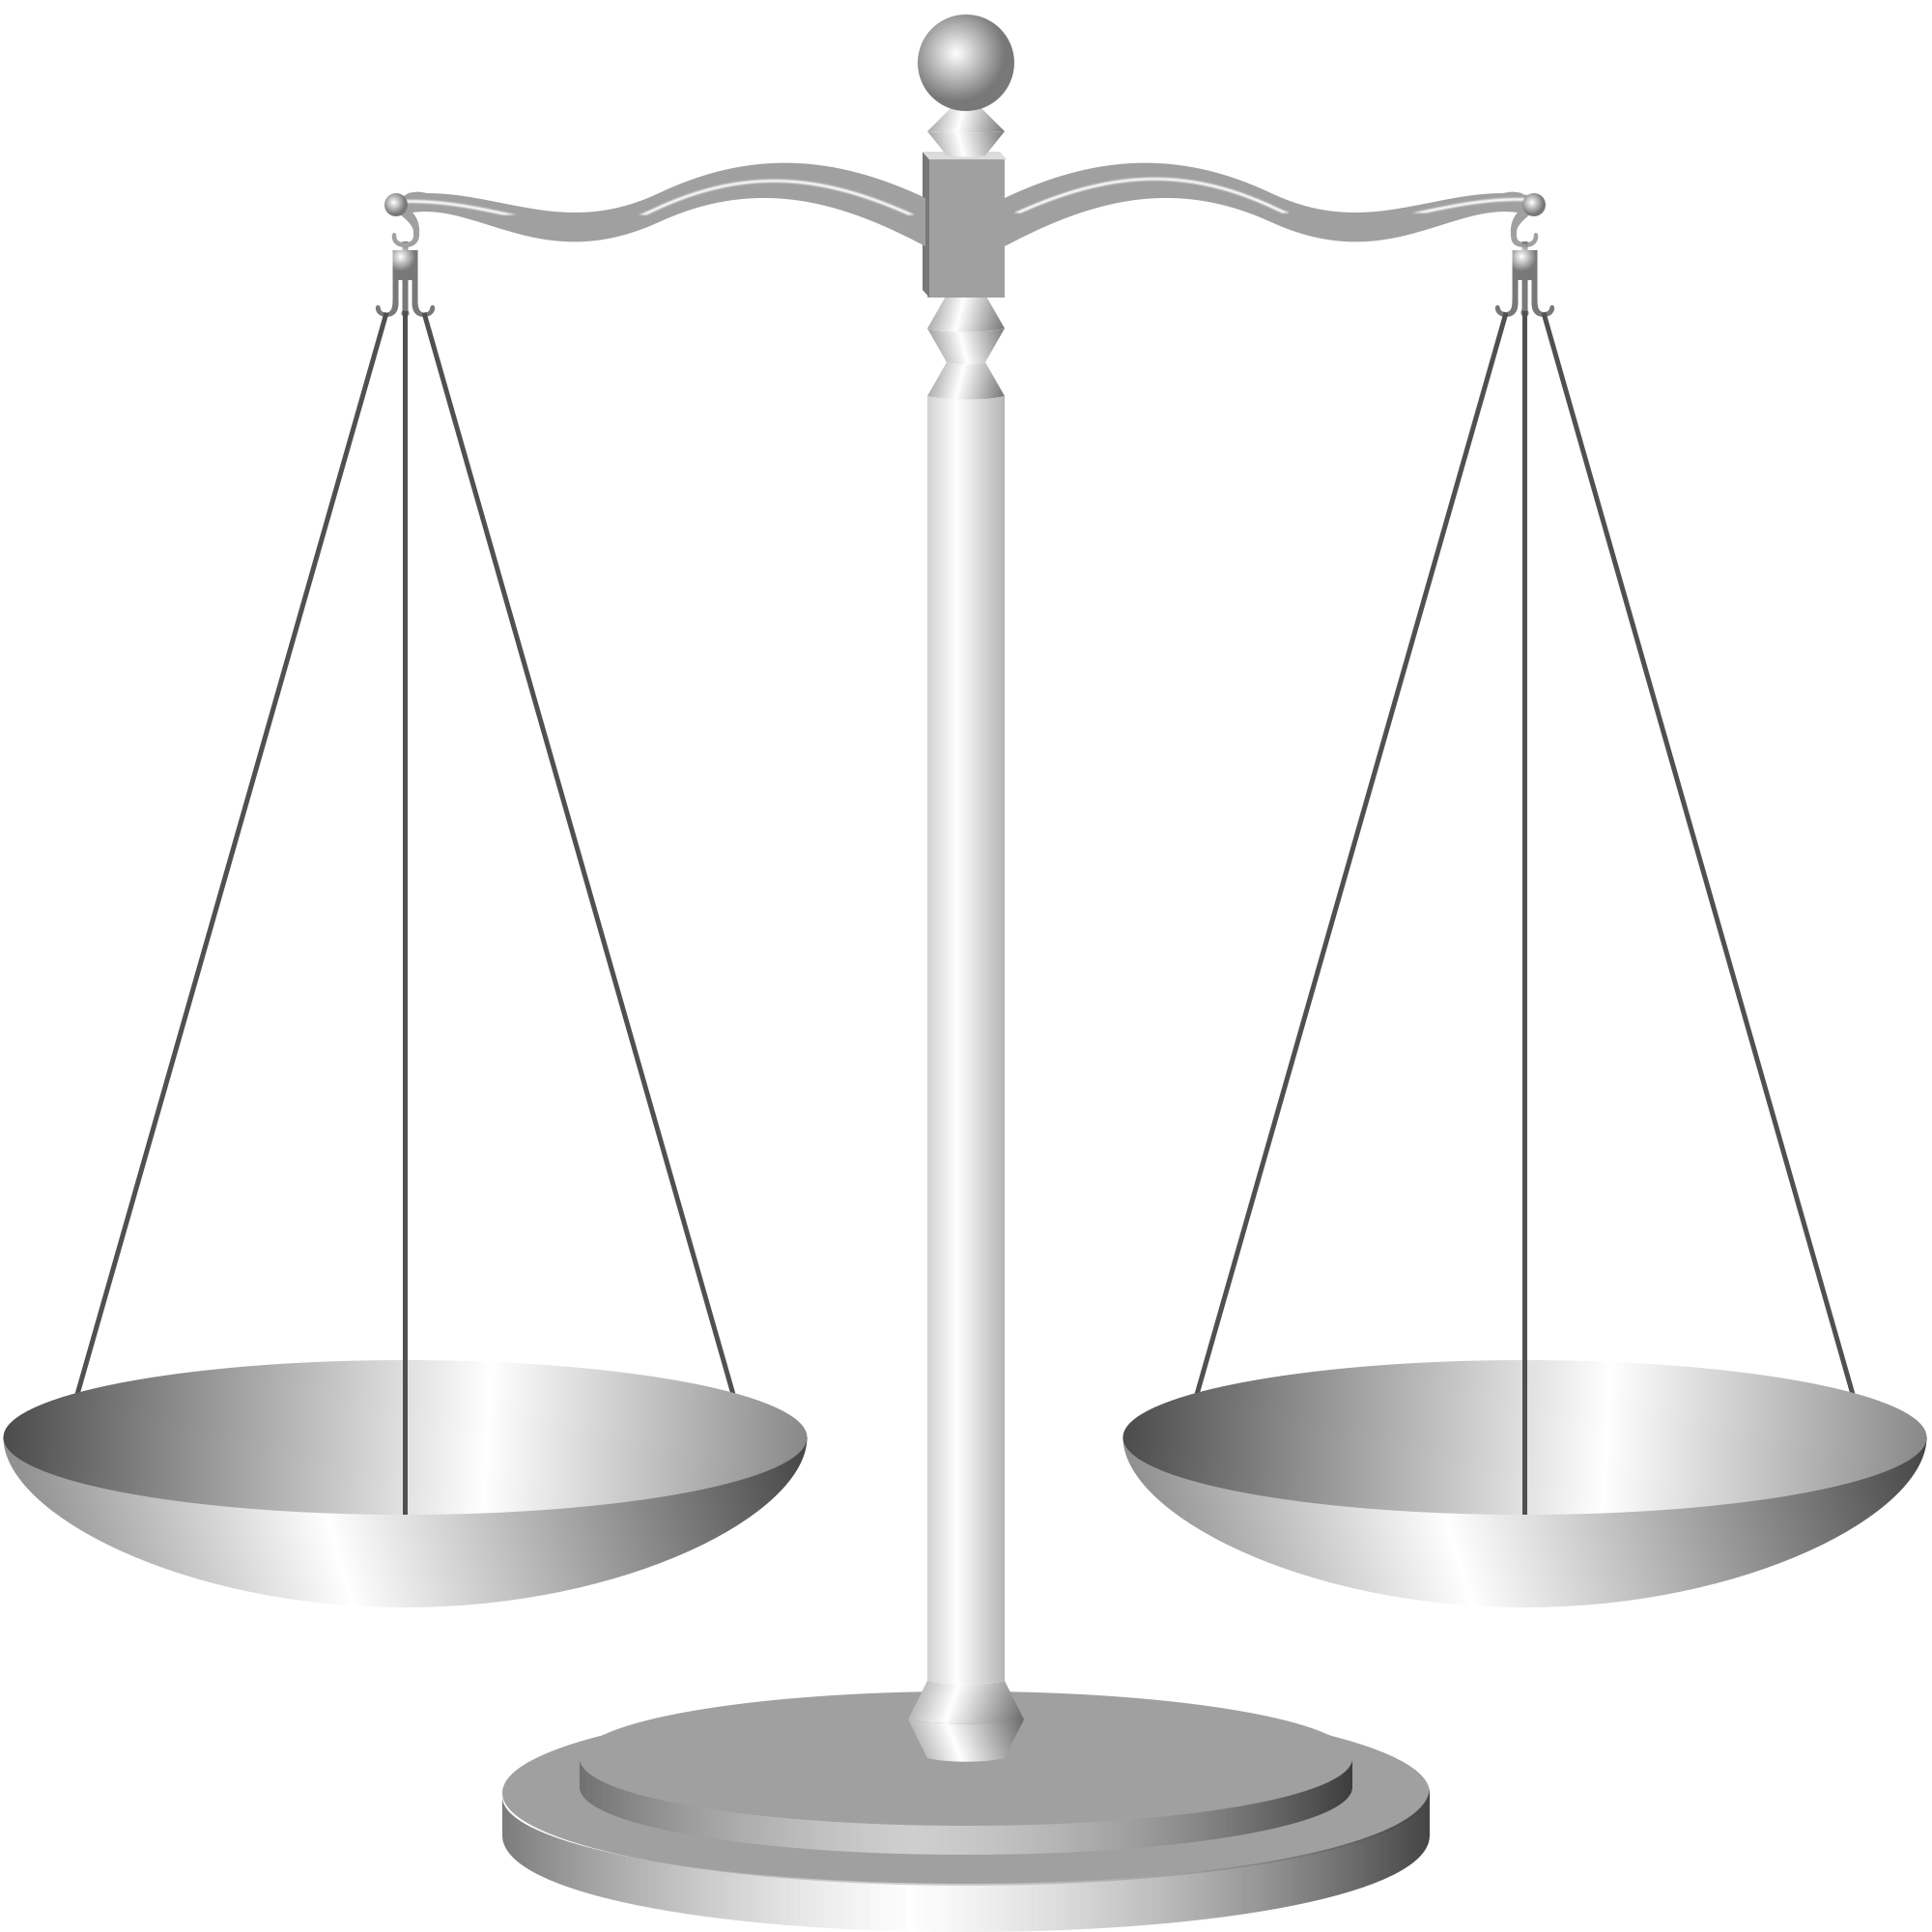 File:Scale of Justice - Wikimedia Commons